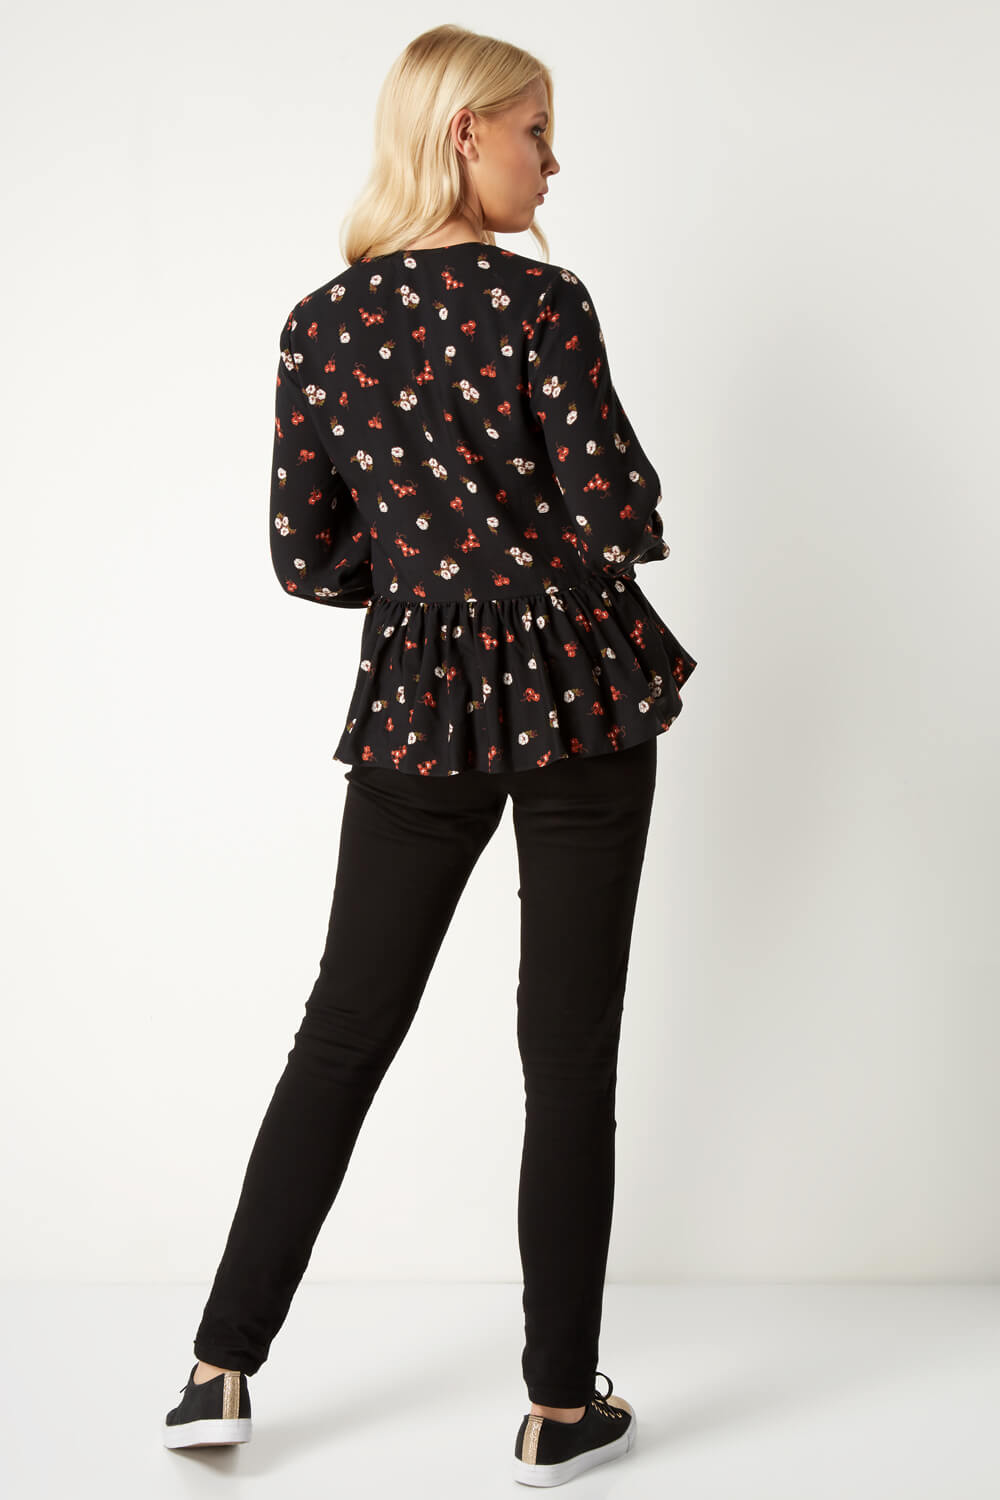 Red Floral Button Front Peplum Top, Image 2 of 4